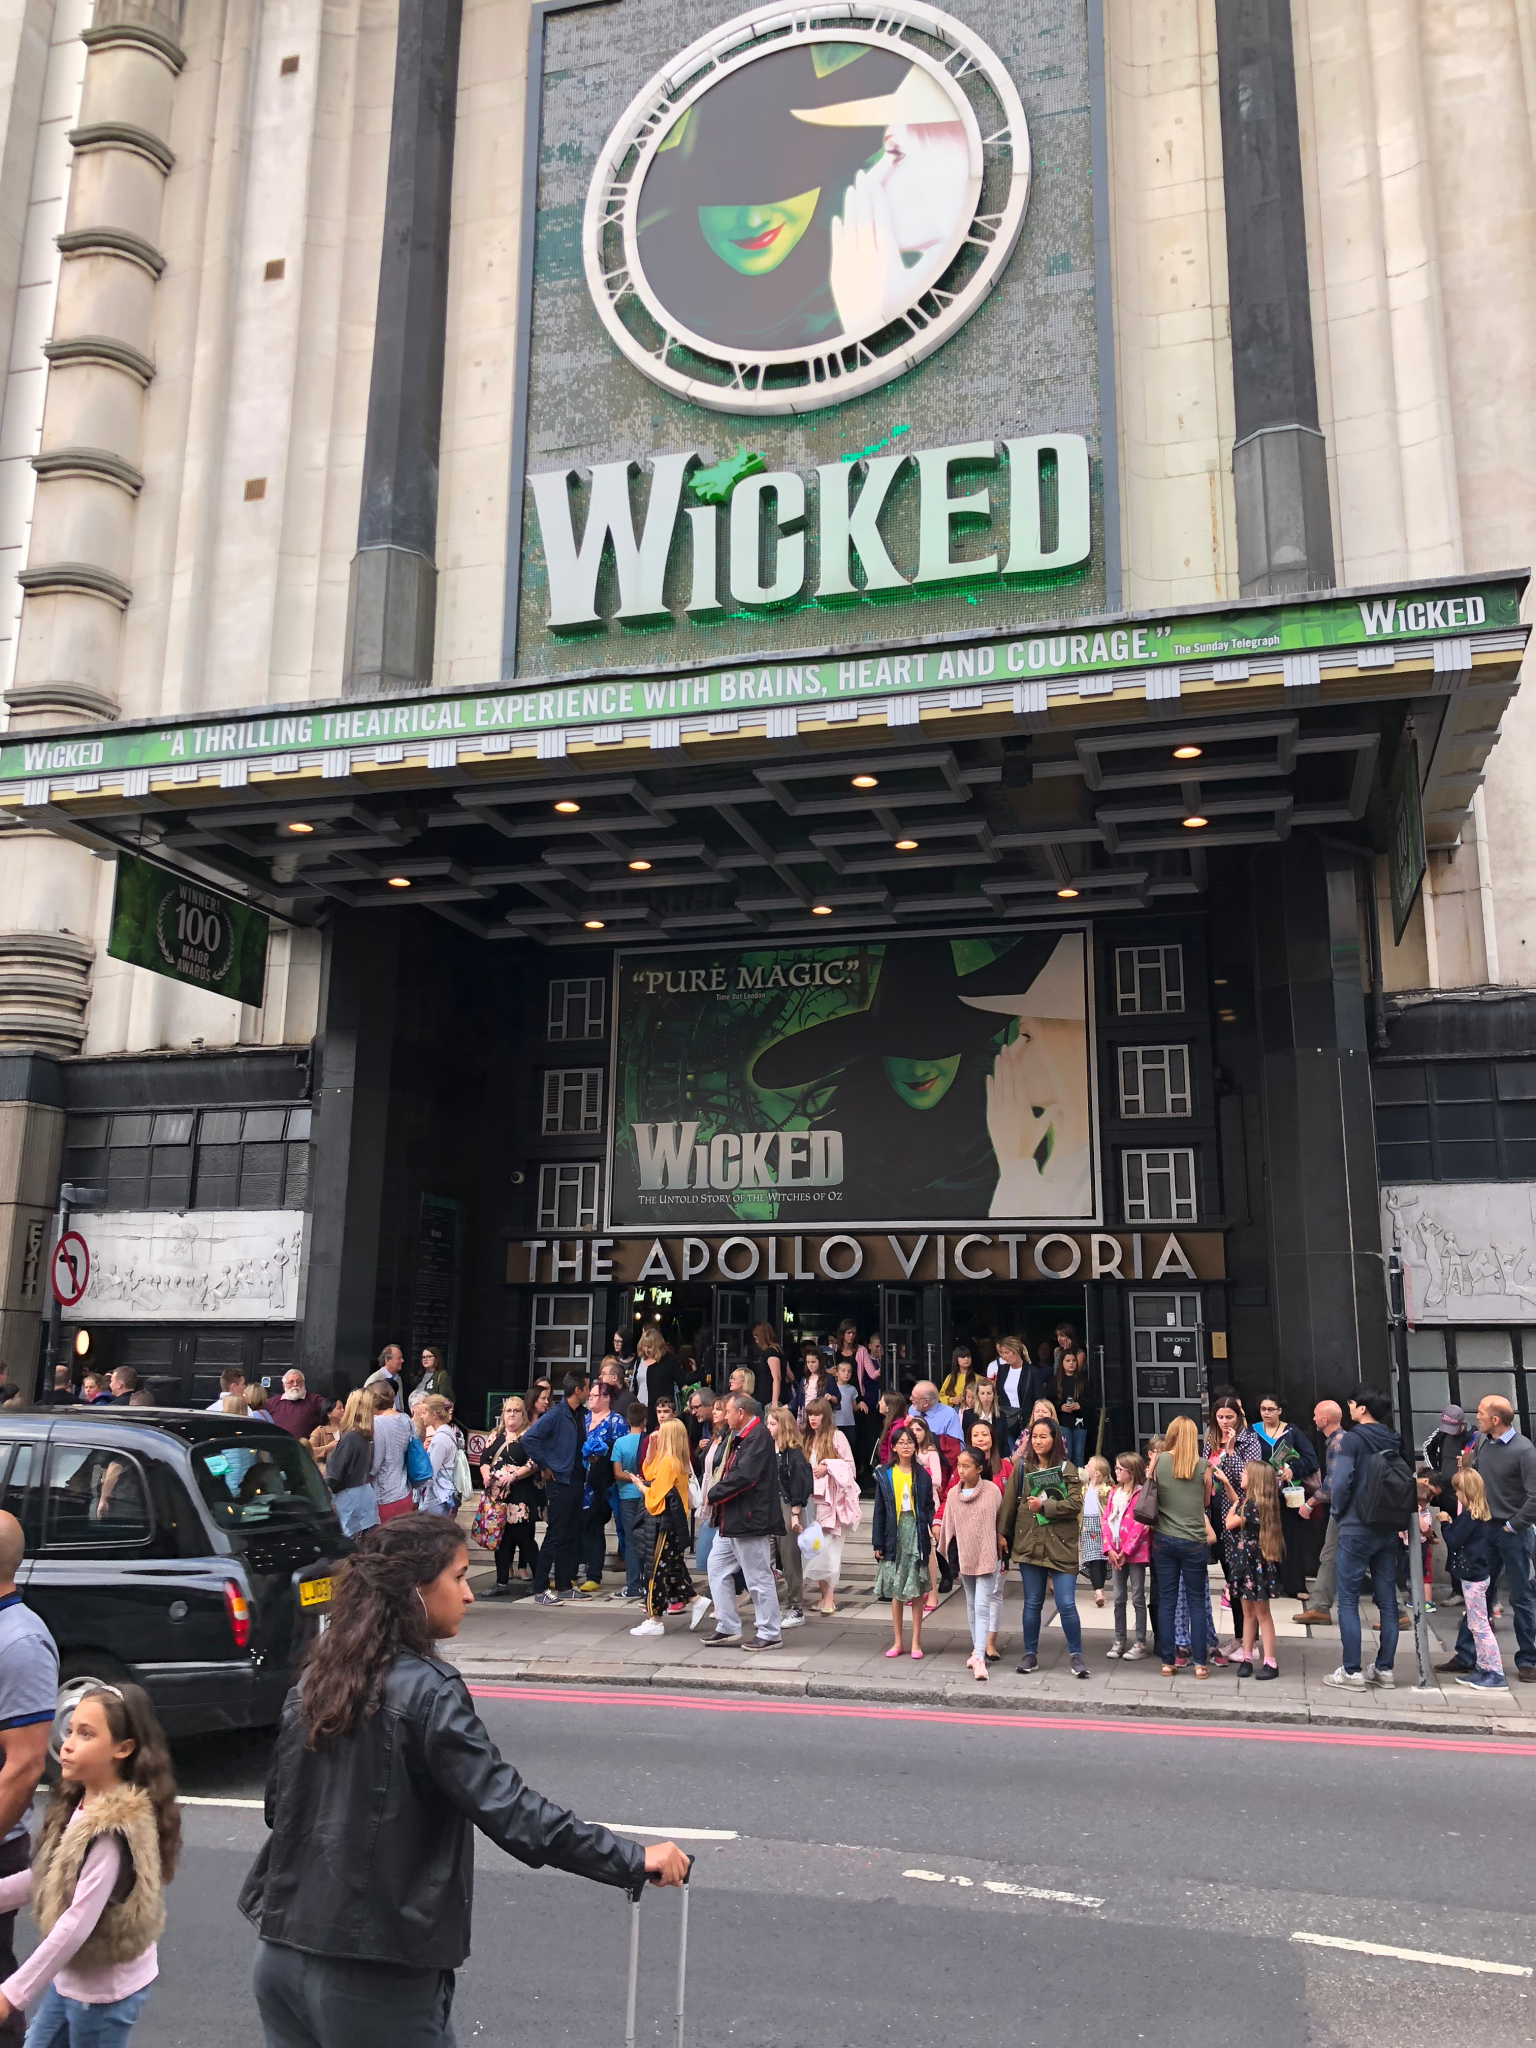 A Wicked trip to London